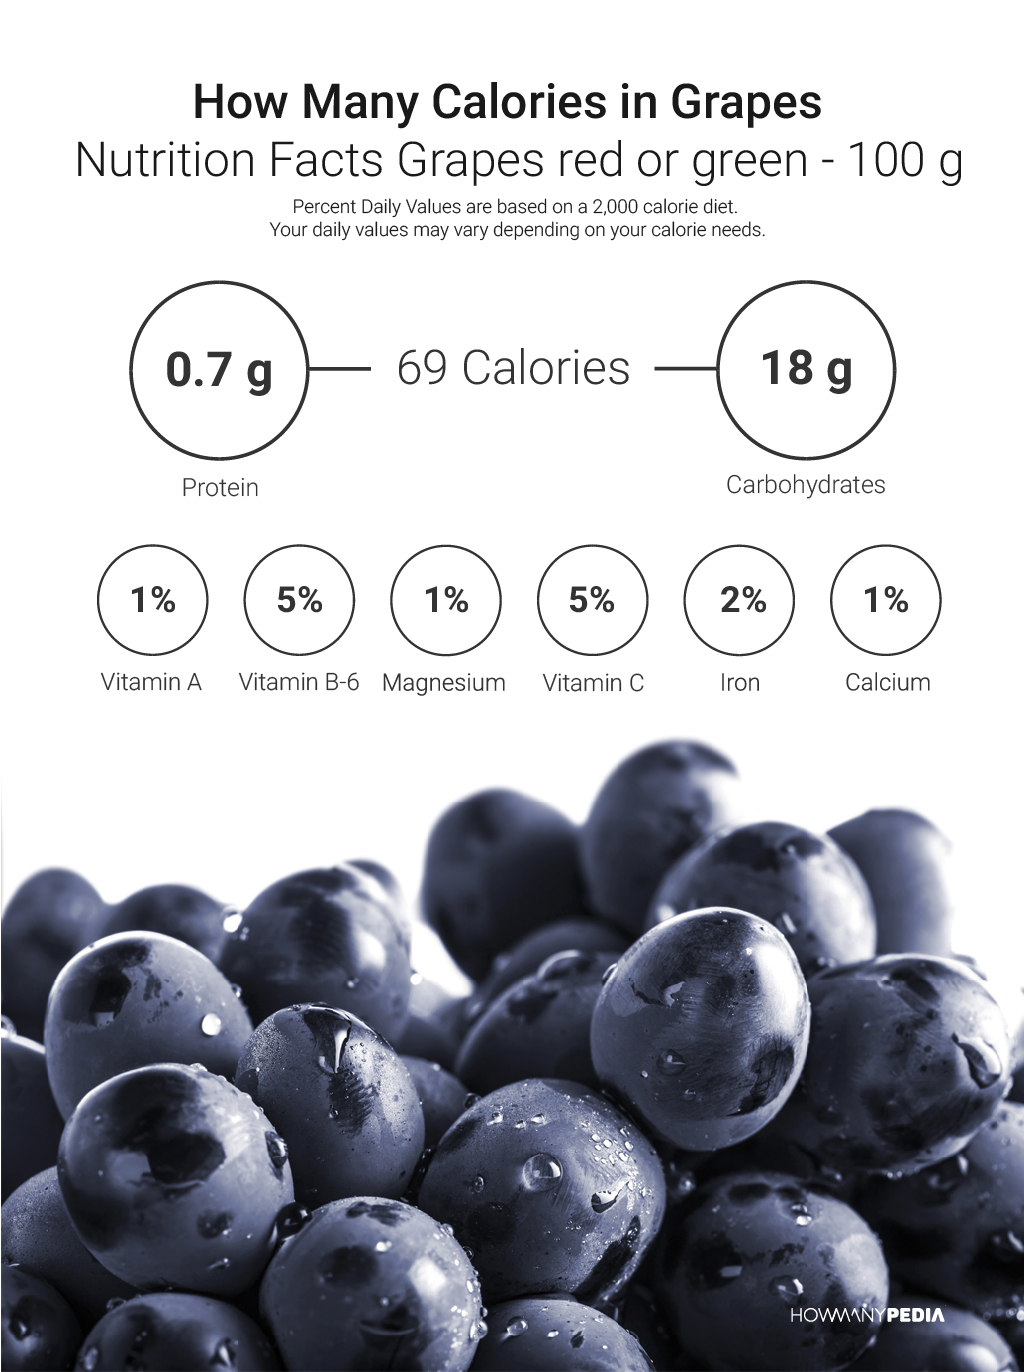 How Calories in Grapes - Howmanypedia